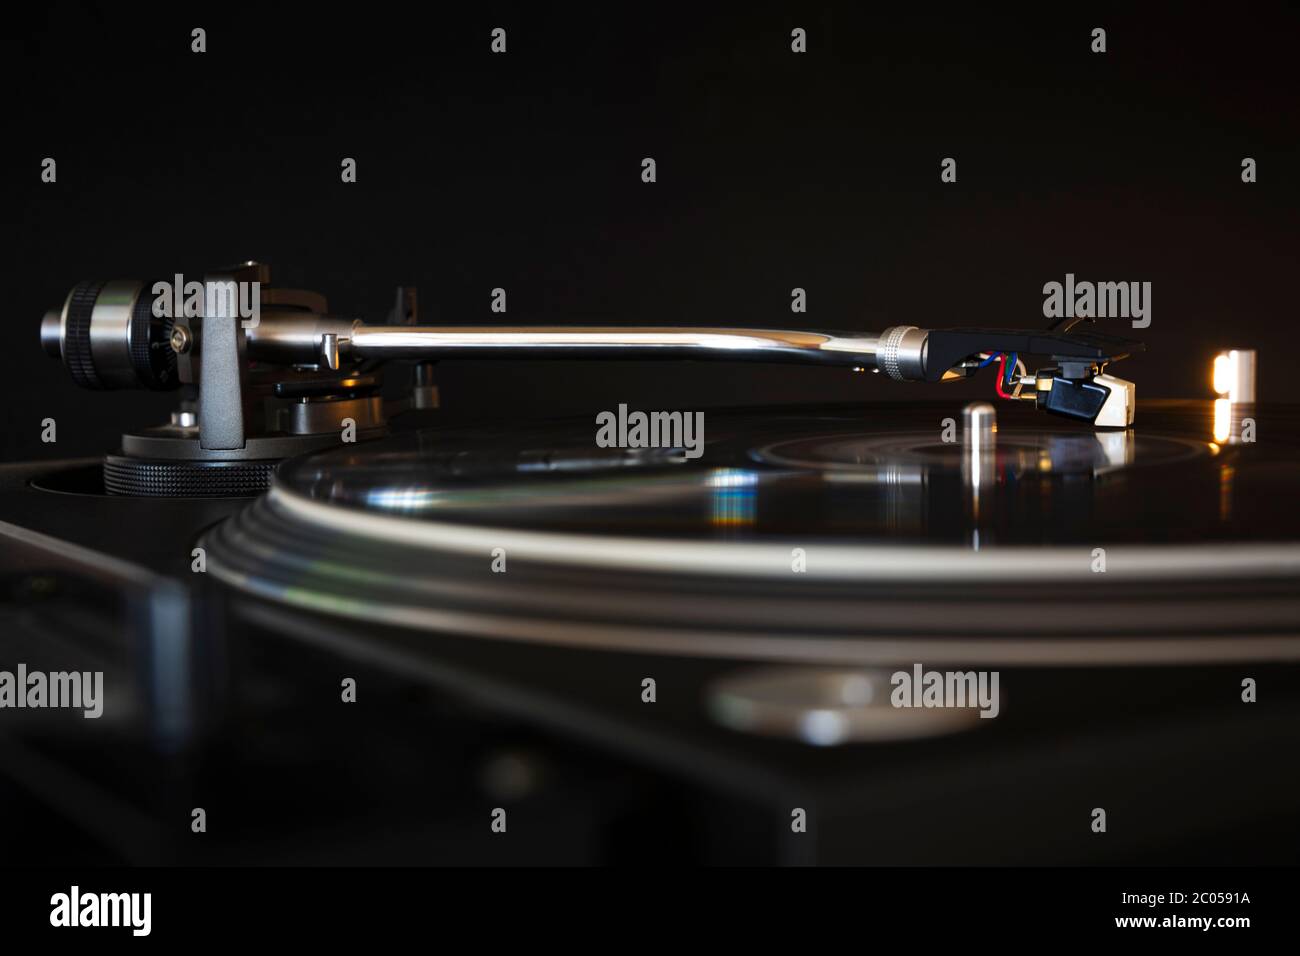 Vinyl record spinning on modern turntable. Black background. Space for text. Play music concept. Stock Photo